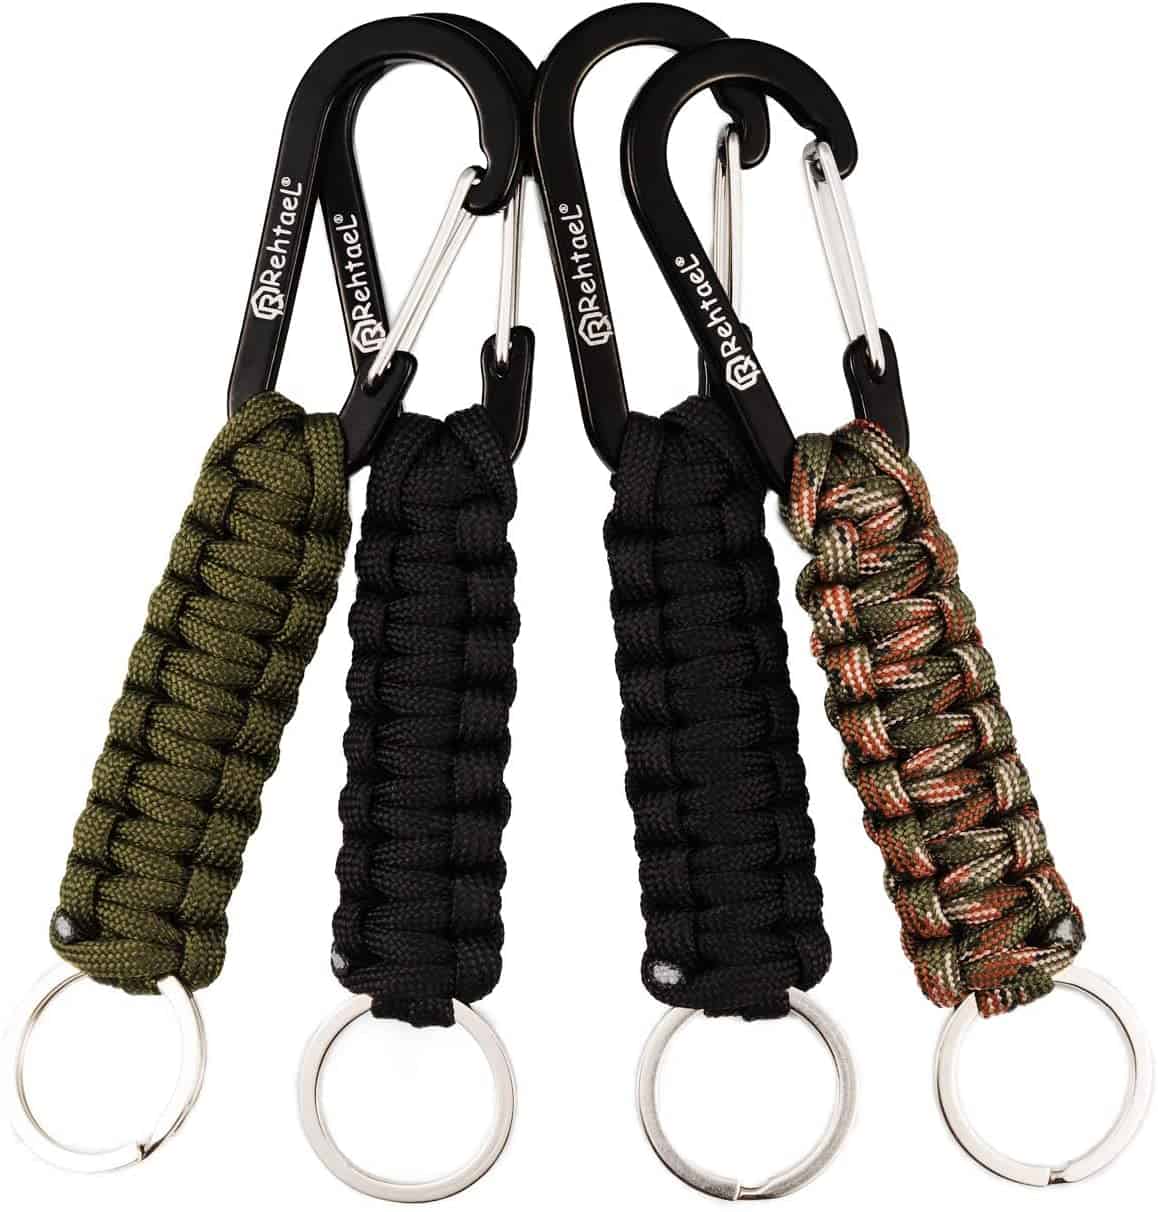 Paracord Keychain - gifts for teen boys